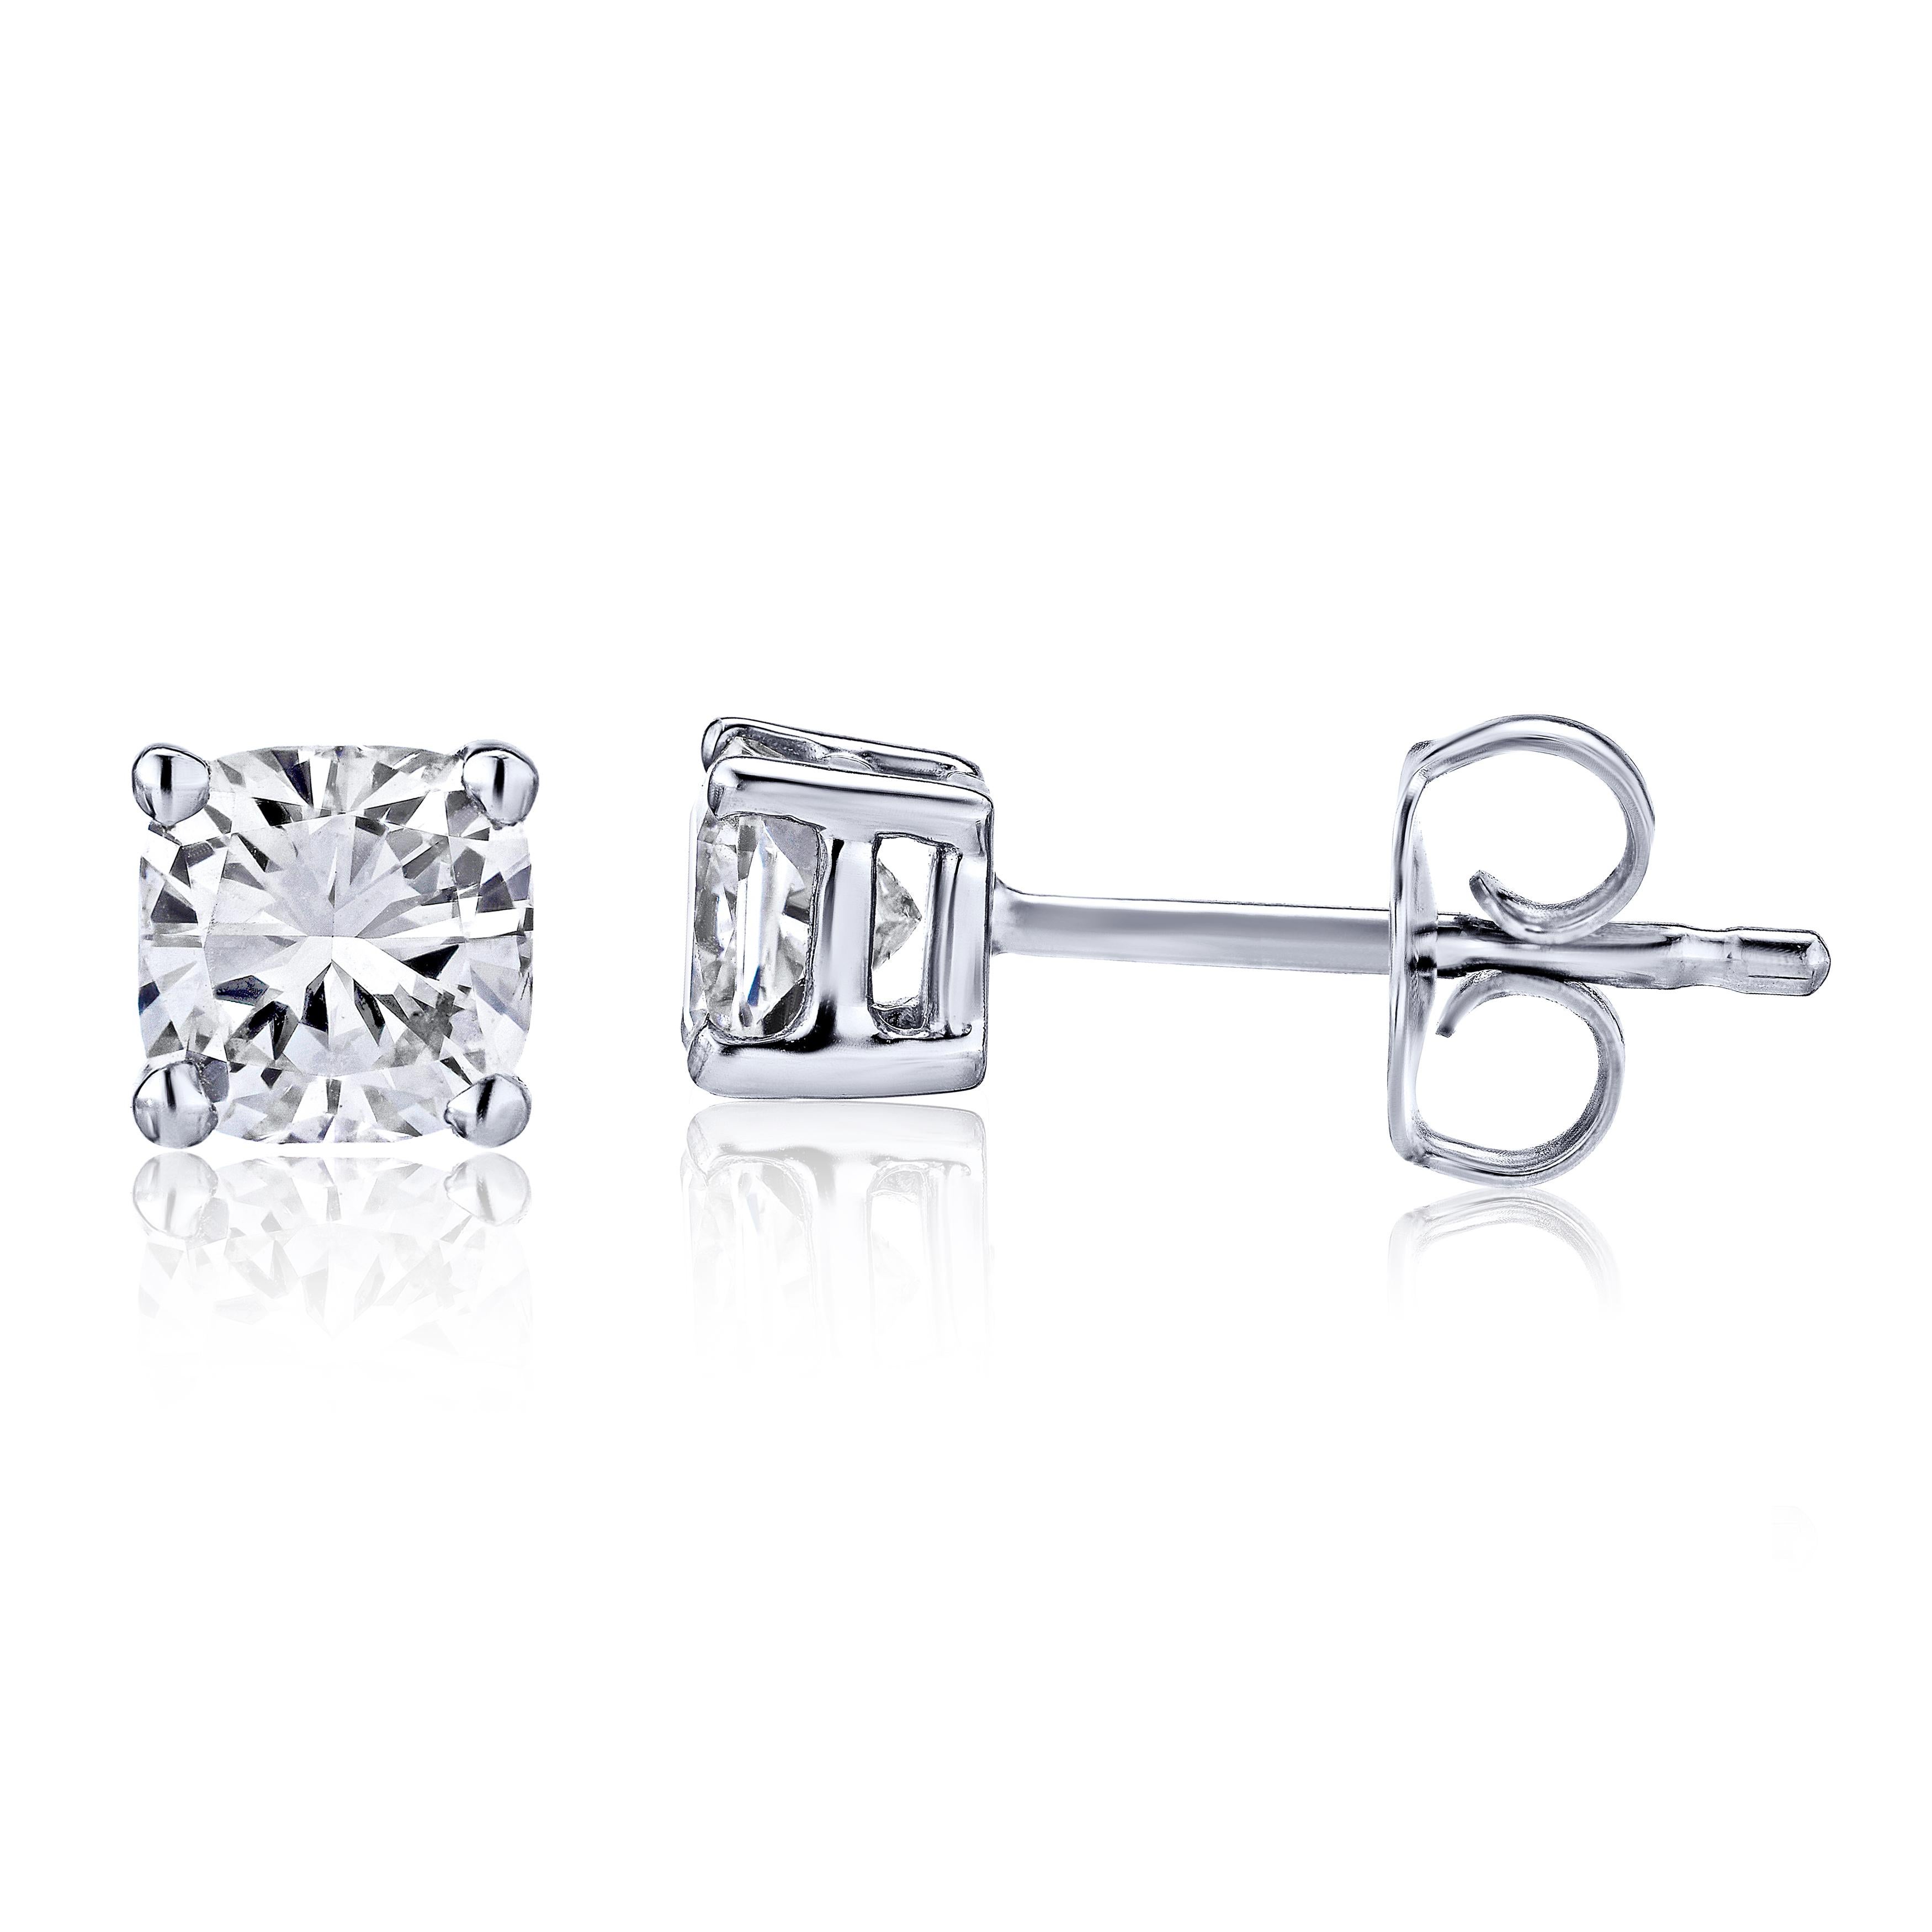 3/4 CT diamonds set in low basket 4 prong push back style. GIA certificates for each diamond . 1 diamond E VS2 0.38 . 2 diamond F VS1 0.40. Total for both diamonds 0.78 carats .
Lab tested guarantee all NATURAL mined diamonds.

Available in